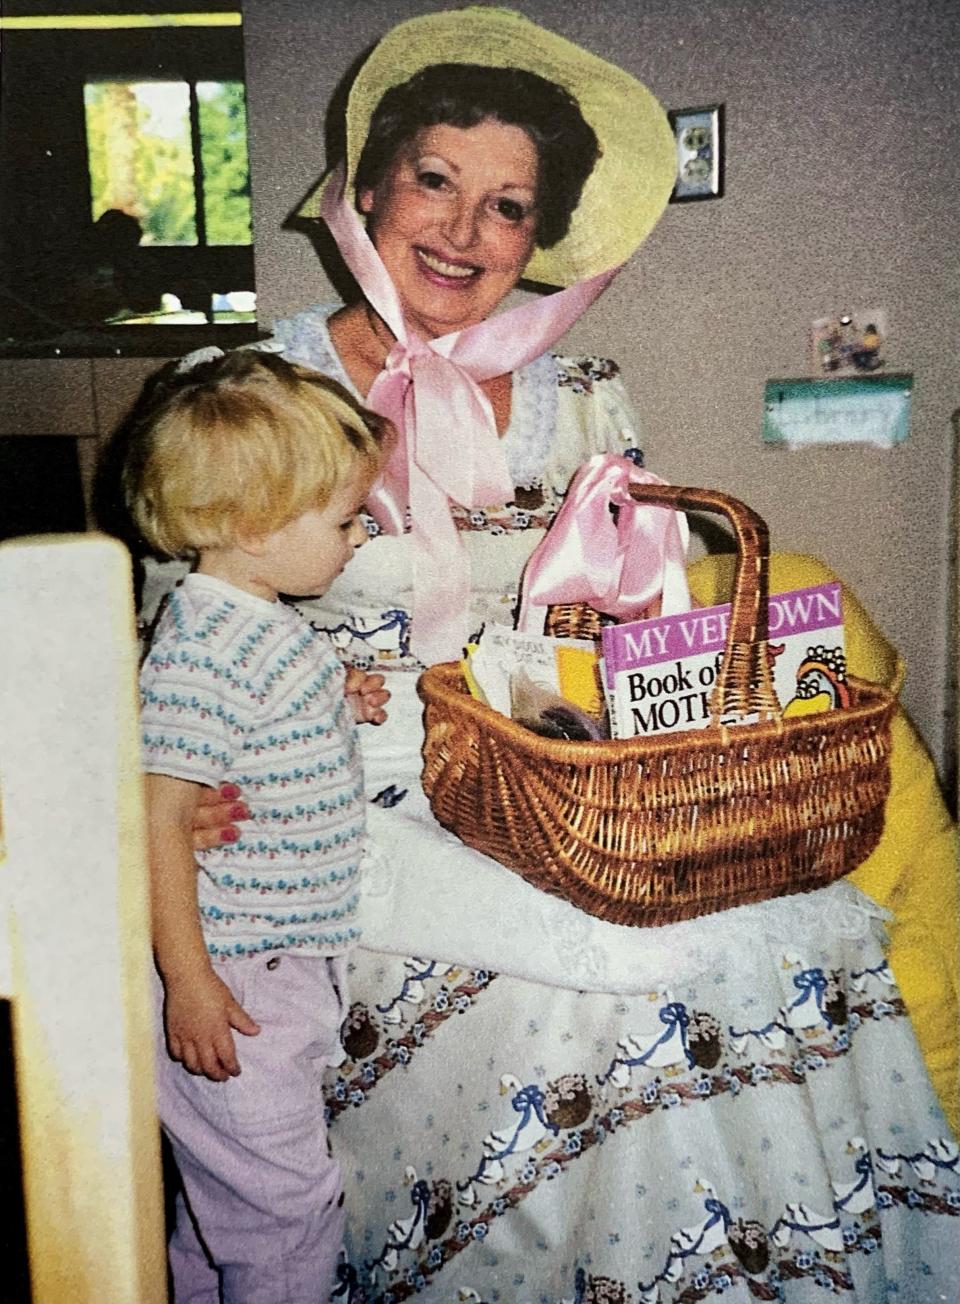 Laura Lee Marcarian has been dressing up as Mother Goose and reading to children since 1983.